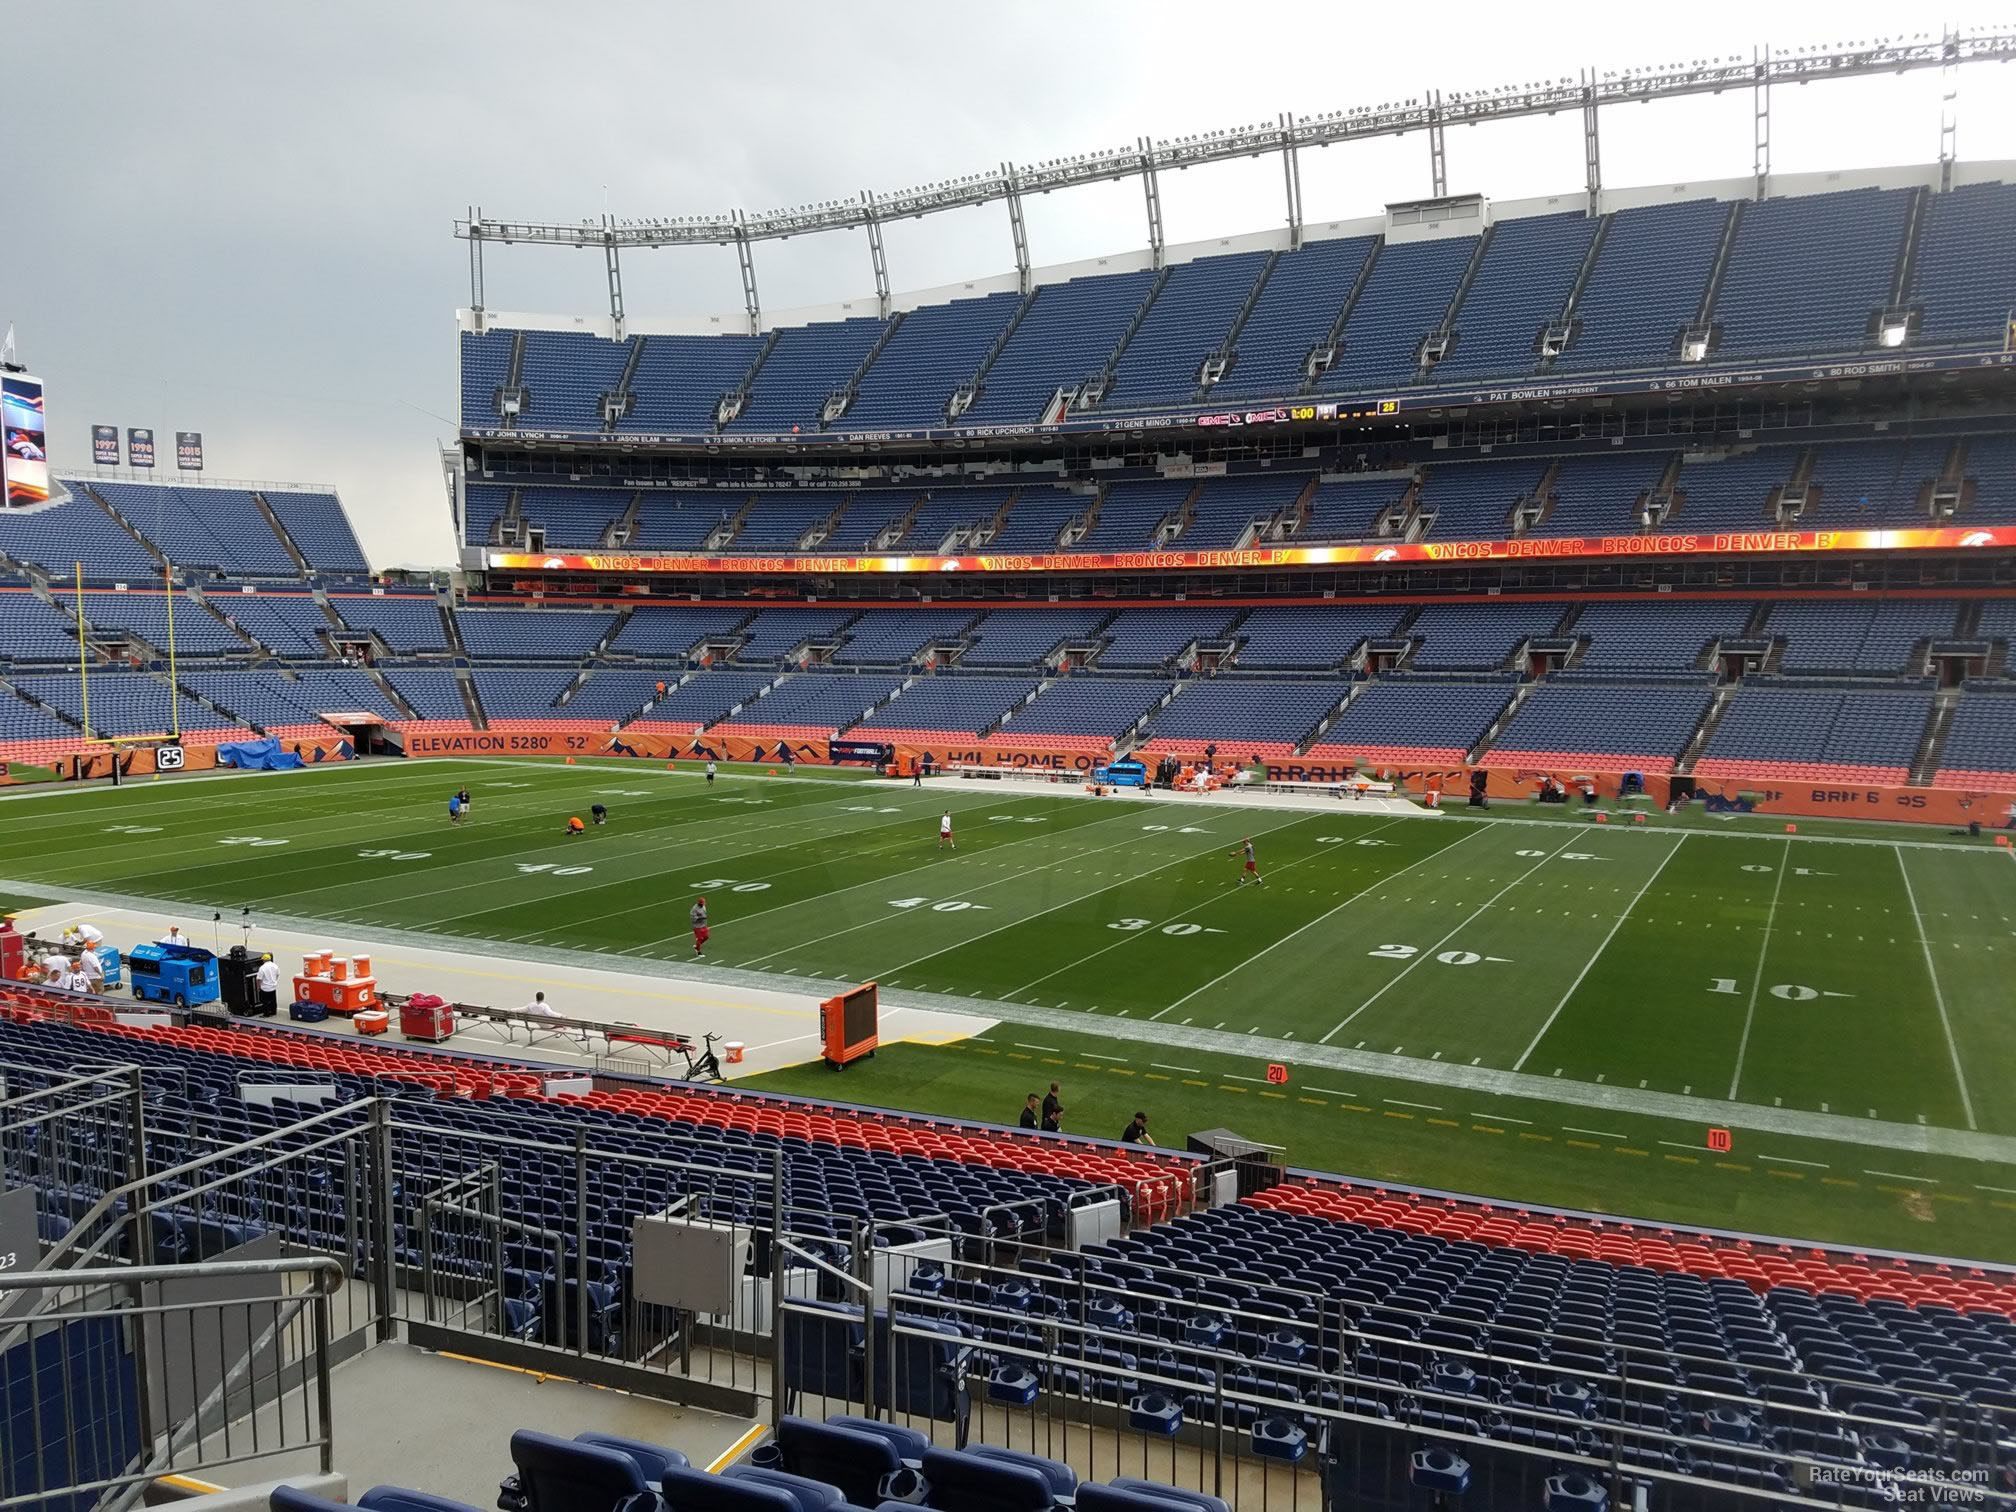 section 120, row 30 seat view  - empower field (at mile high)